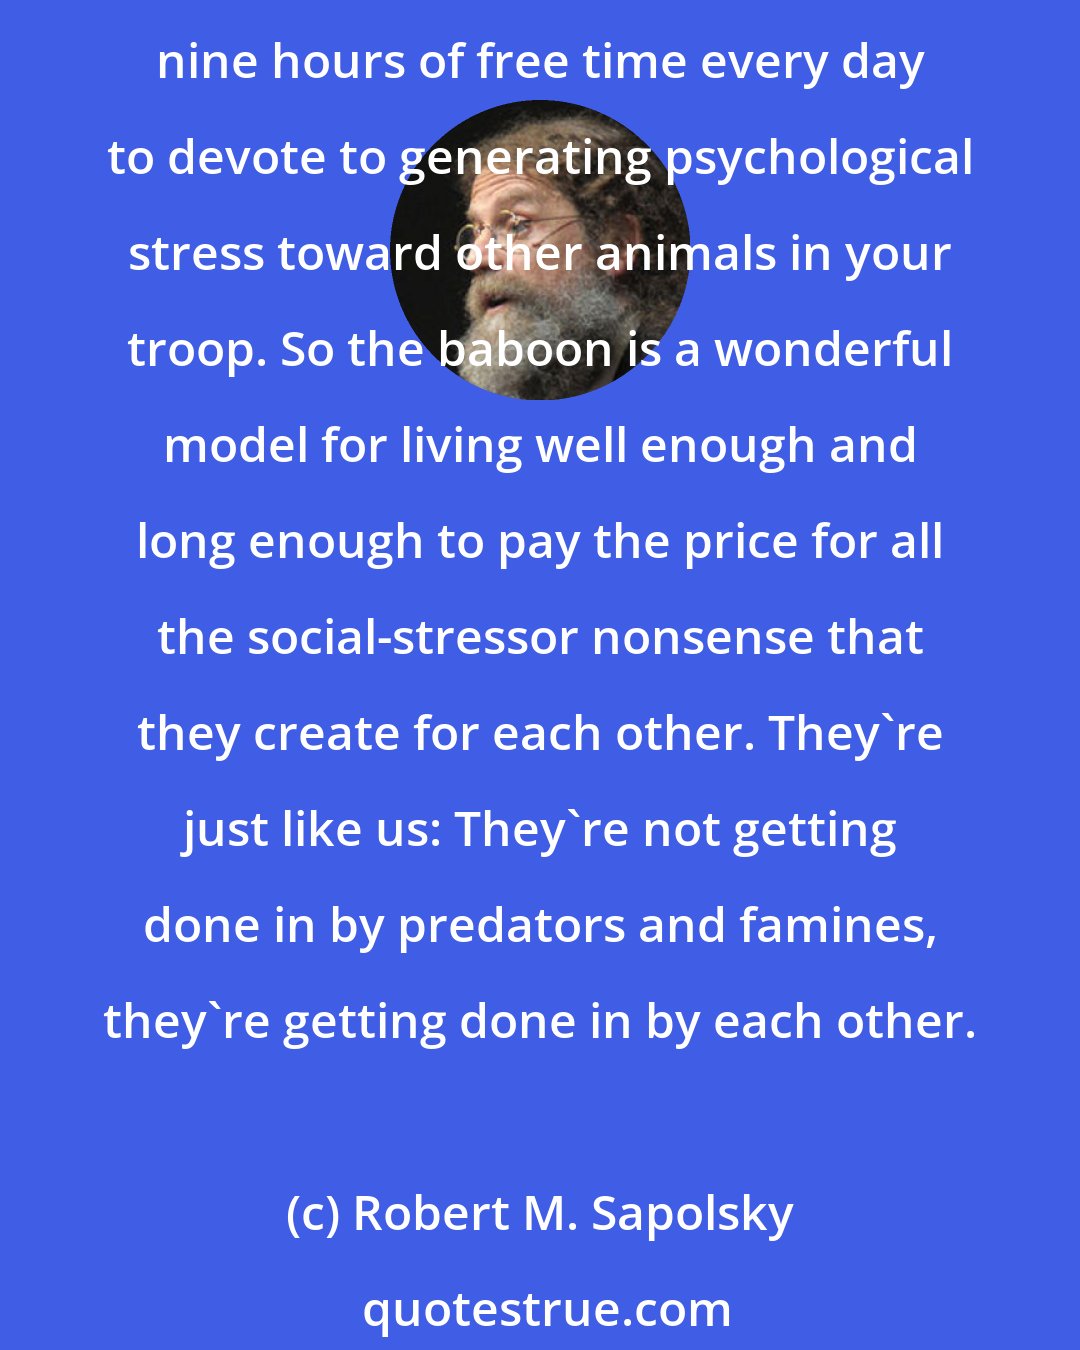 Robert M. Sapolsky: If you live in a baboon troop in the Serengeti, you only have to work three hours a day for your calories, and predators don't mess with you much. What that means is you've got nine hours of free time every day to devote to generating psychological stress toward other animals in your troop. So the baboon is a wonderful model for living well enough and long enough to pay the price for all the social-stressor nonsense that they create for each other. They're just like us: They're not getting done in by predators and famines, they're getting done in by each other.